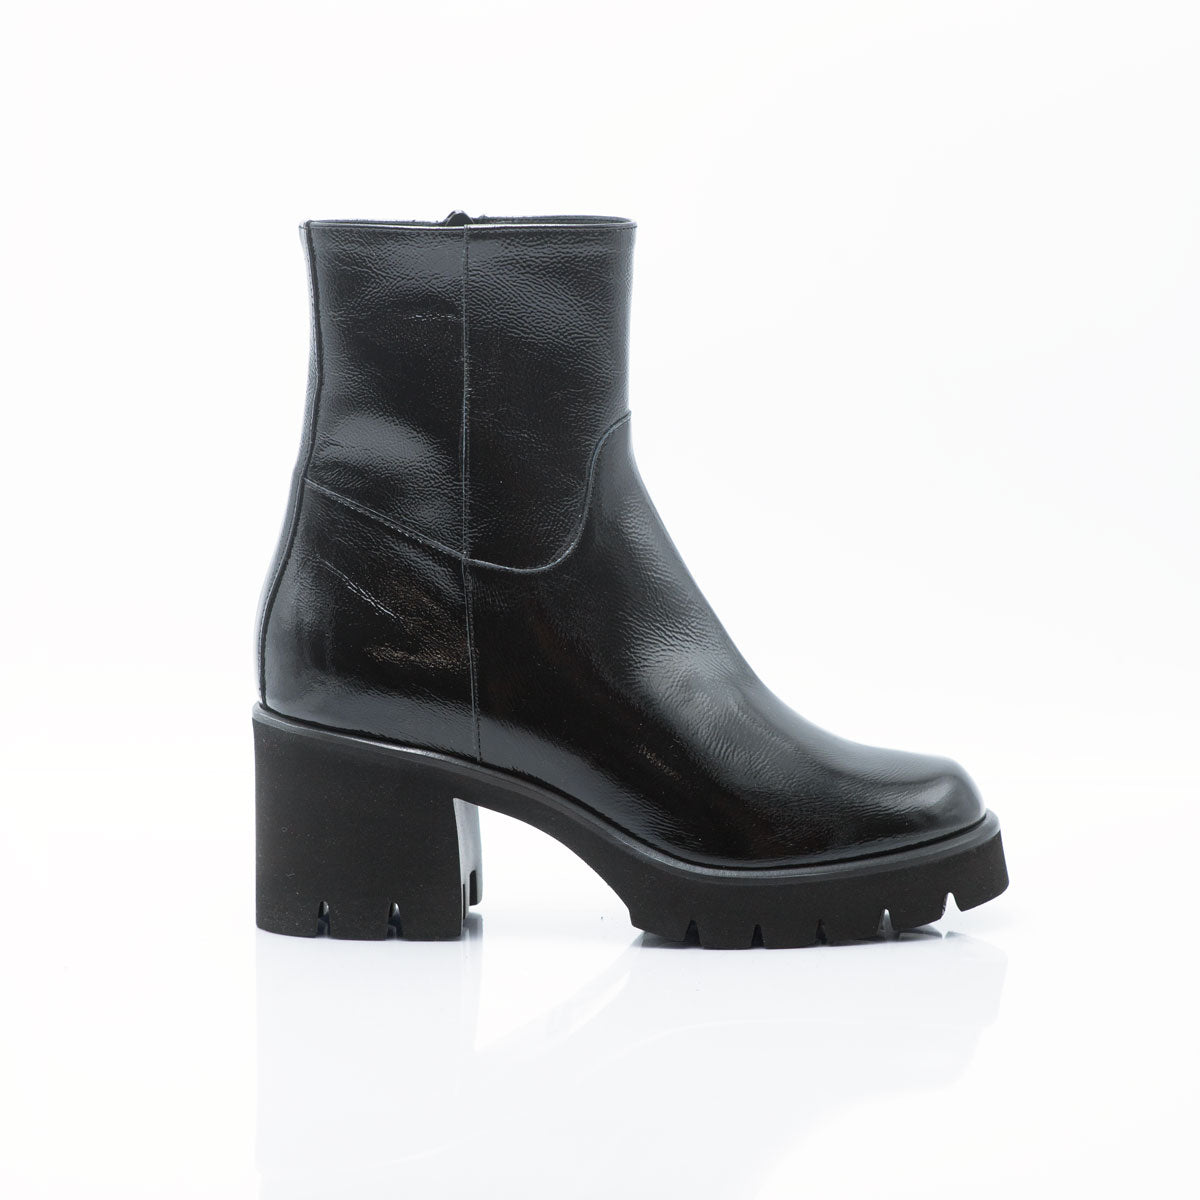 Figini - Black 70s-style Ankle Boots with an XL Gumlight sole